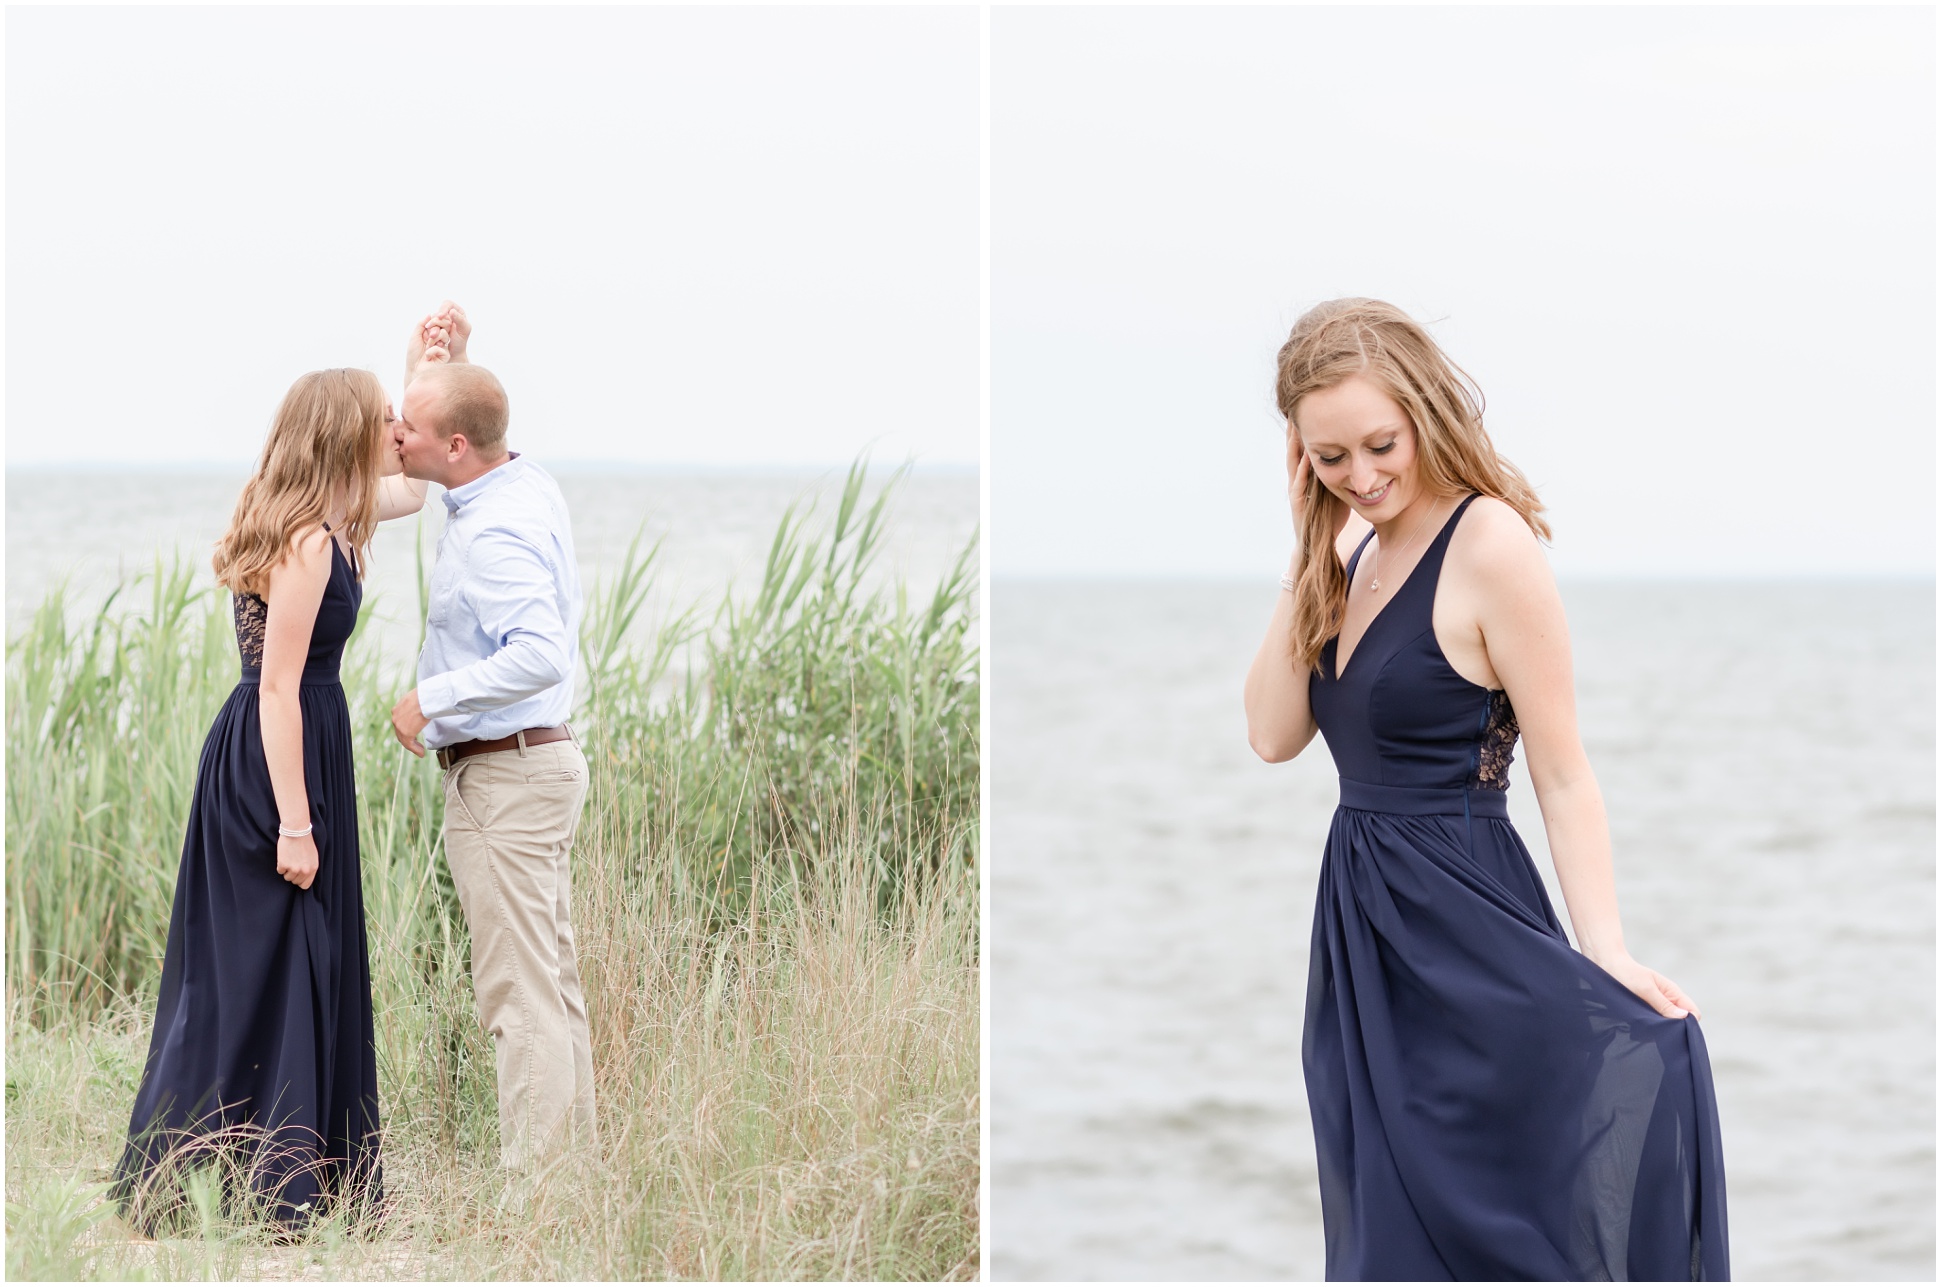 Left Image: Sara leaning in to kiss Will after twirling, Right Image: Sara wearing blue gown at the water.